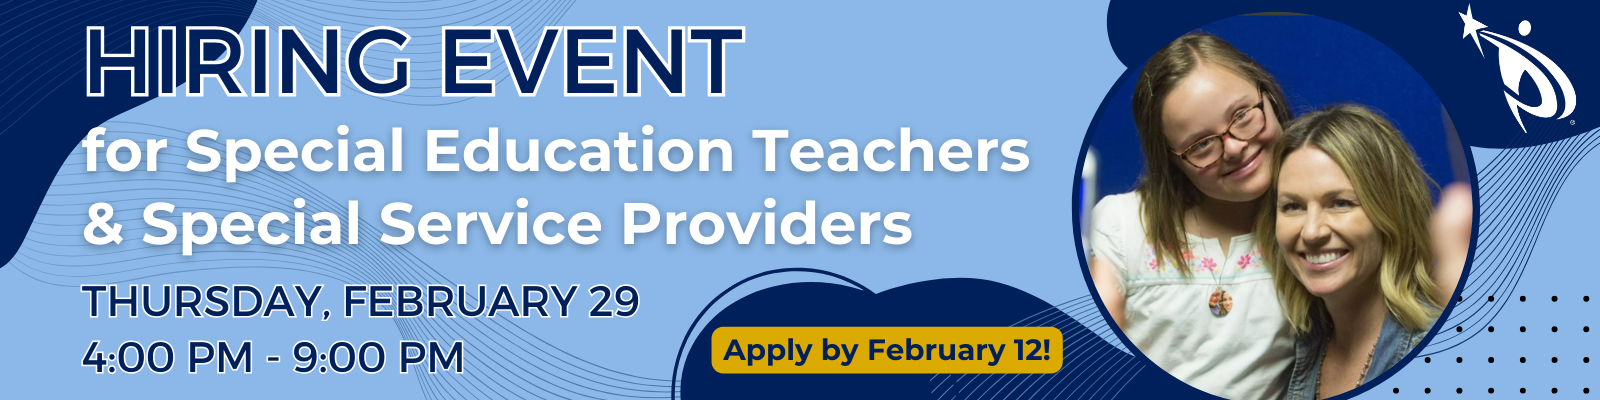 Hiring Event for Special Education Teachers & Special Service Providers